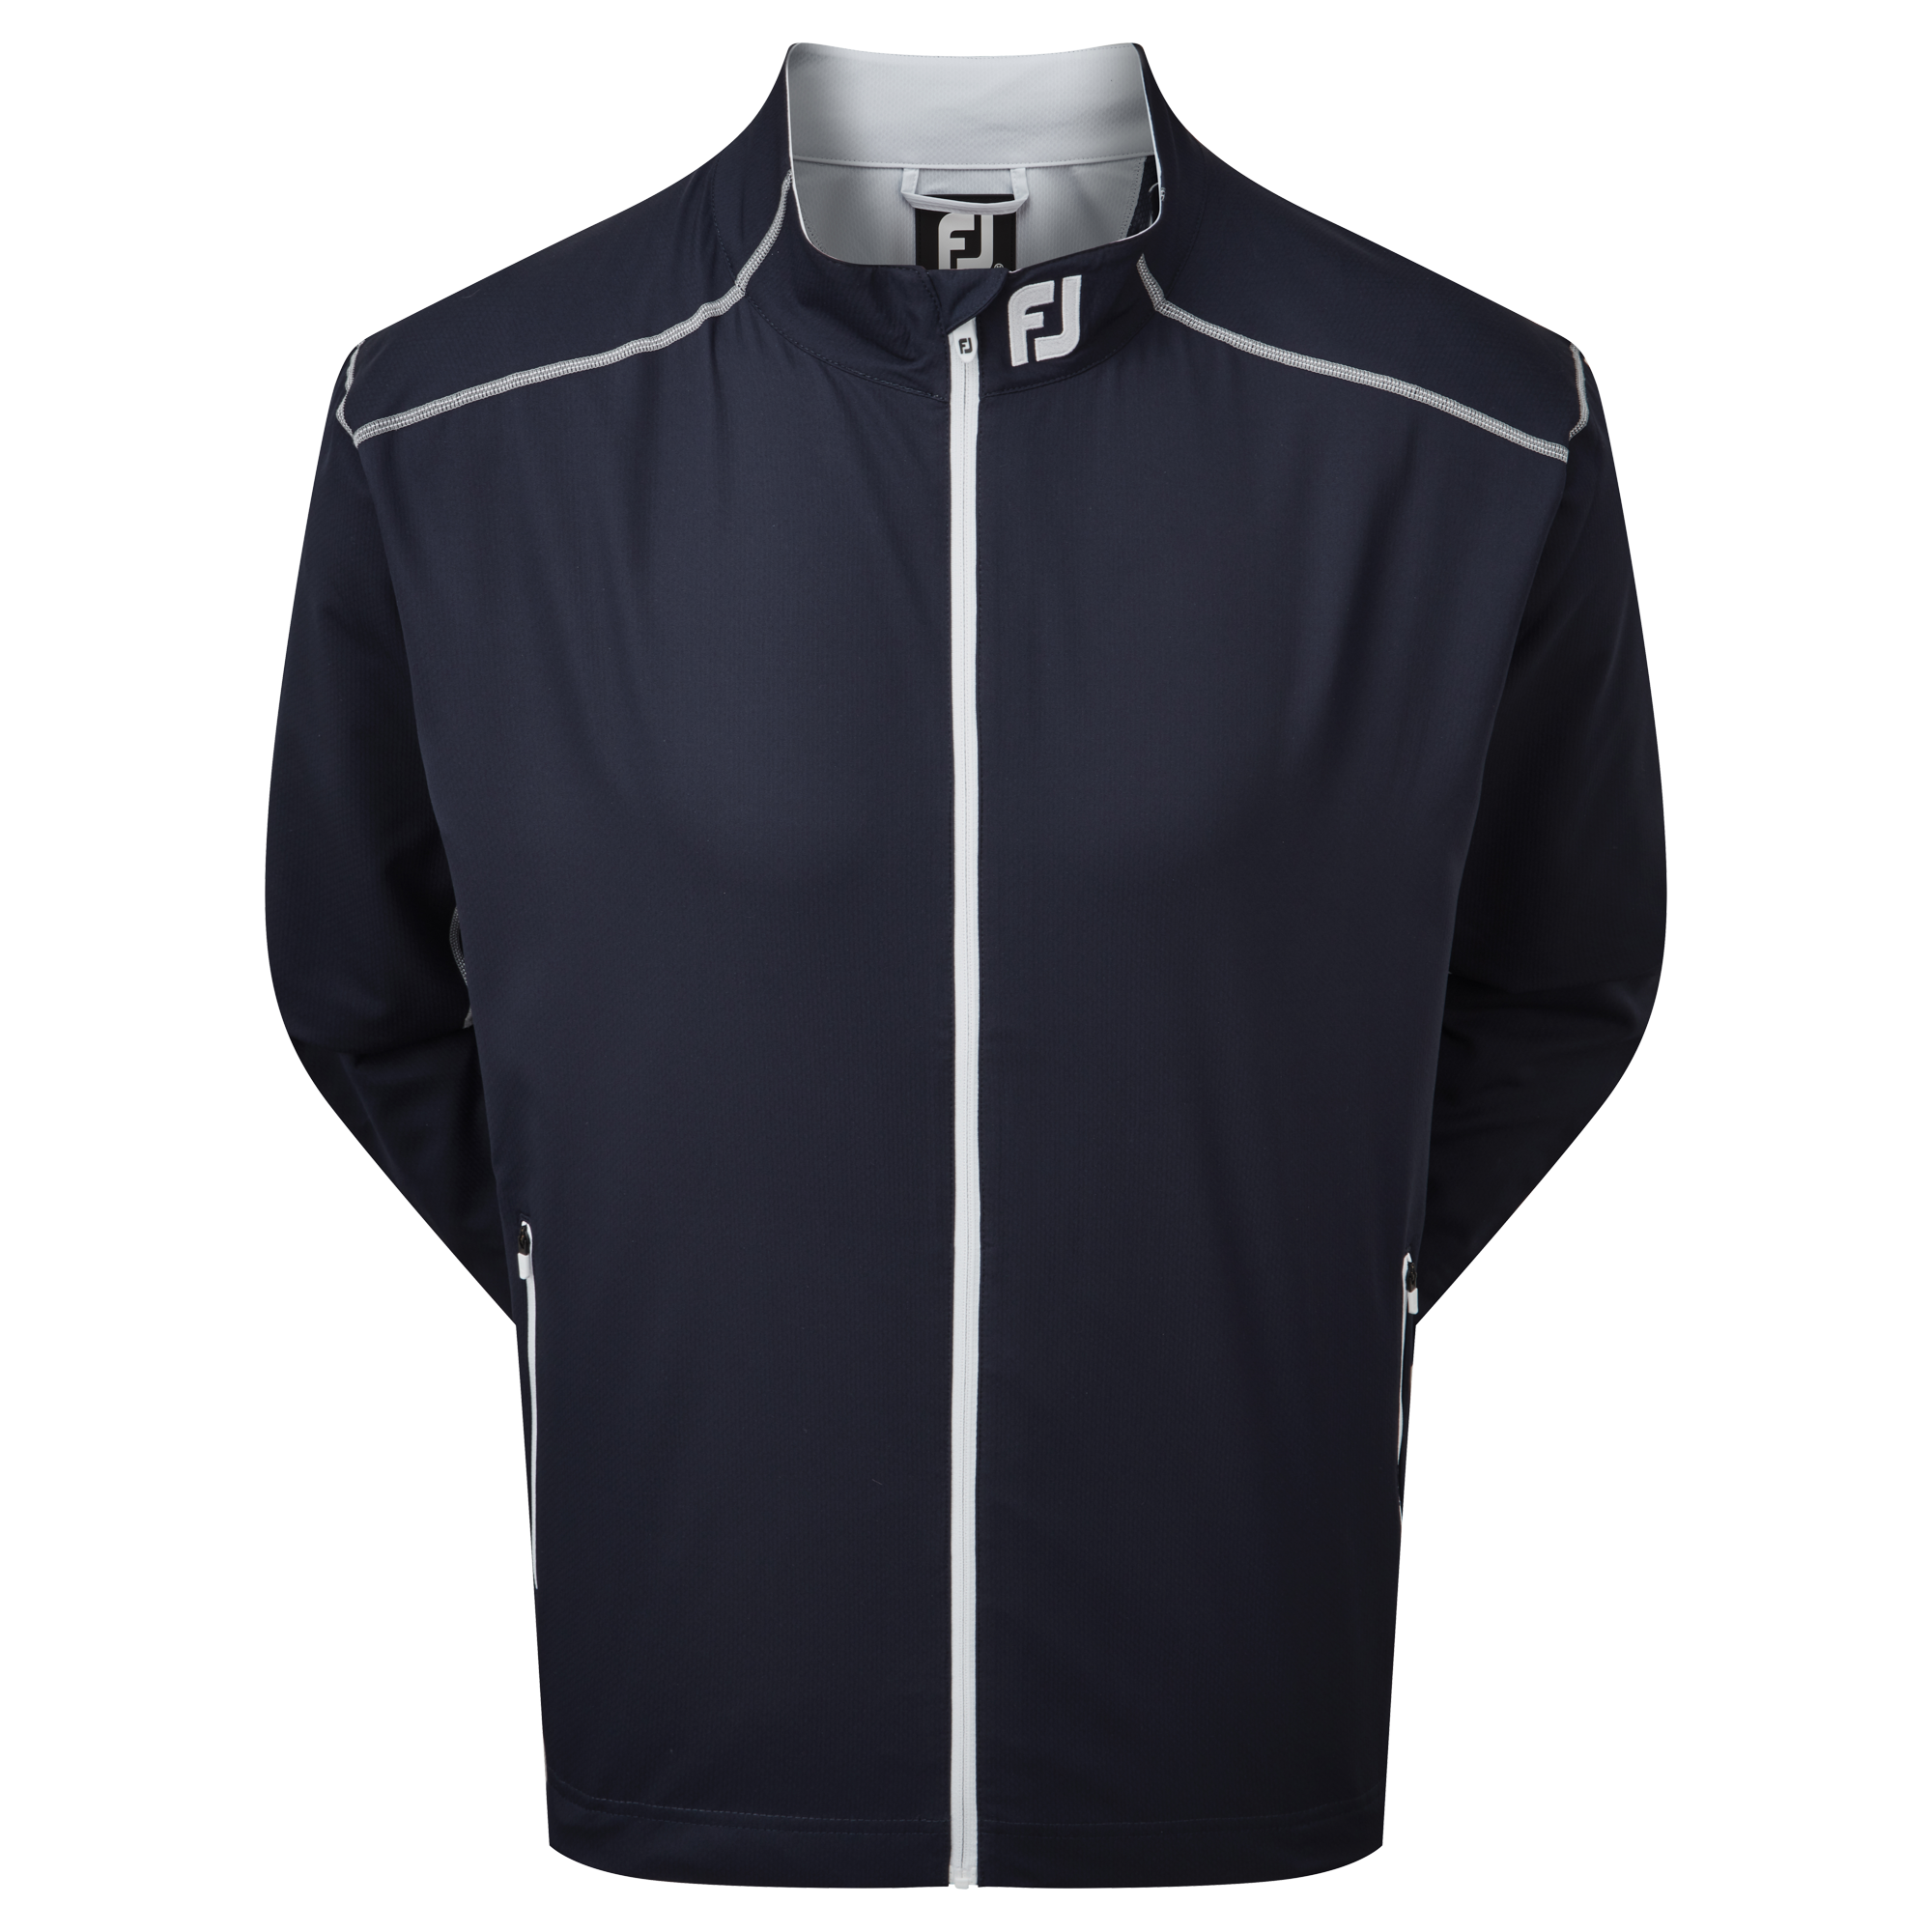 Coupe-vent Full-Zip manches longues